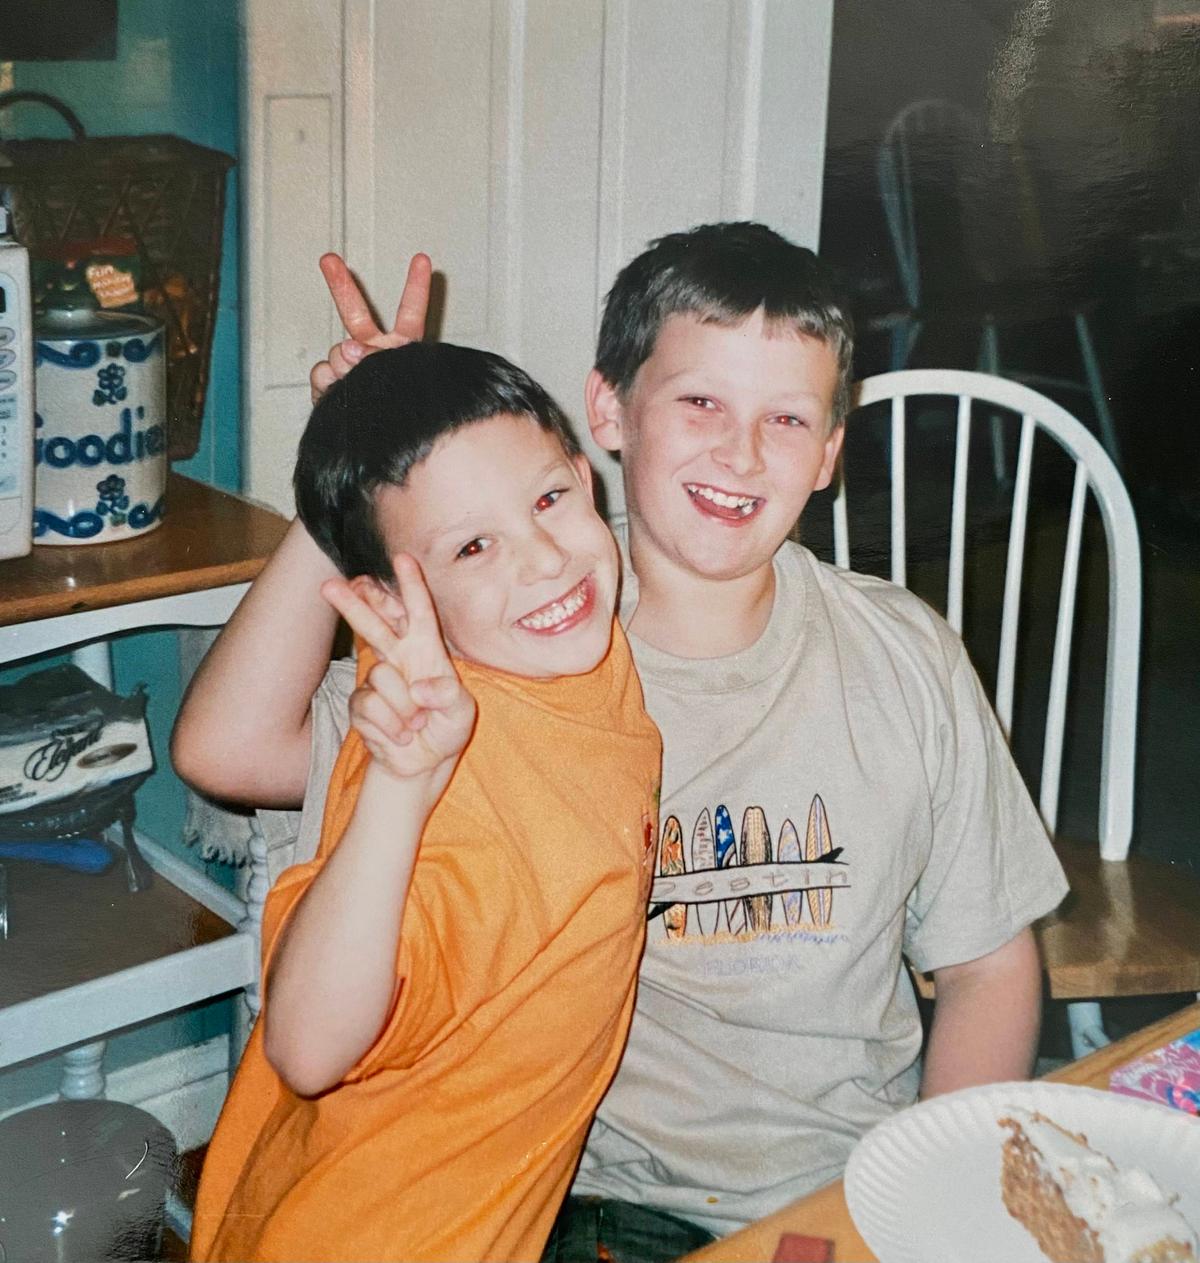 Griffin, at 5 years old, with his brother. (Courtesy of <a href="https://www.instagram.com/griffin.furlong/">Griffin Furlong</a>)